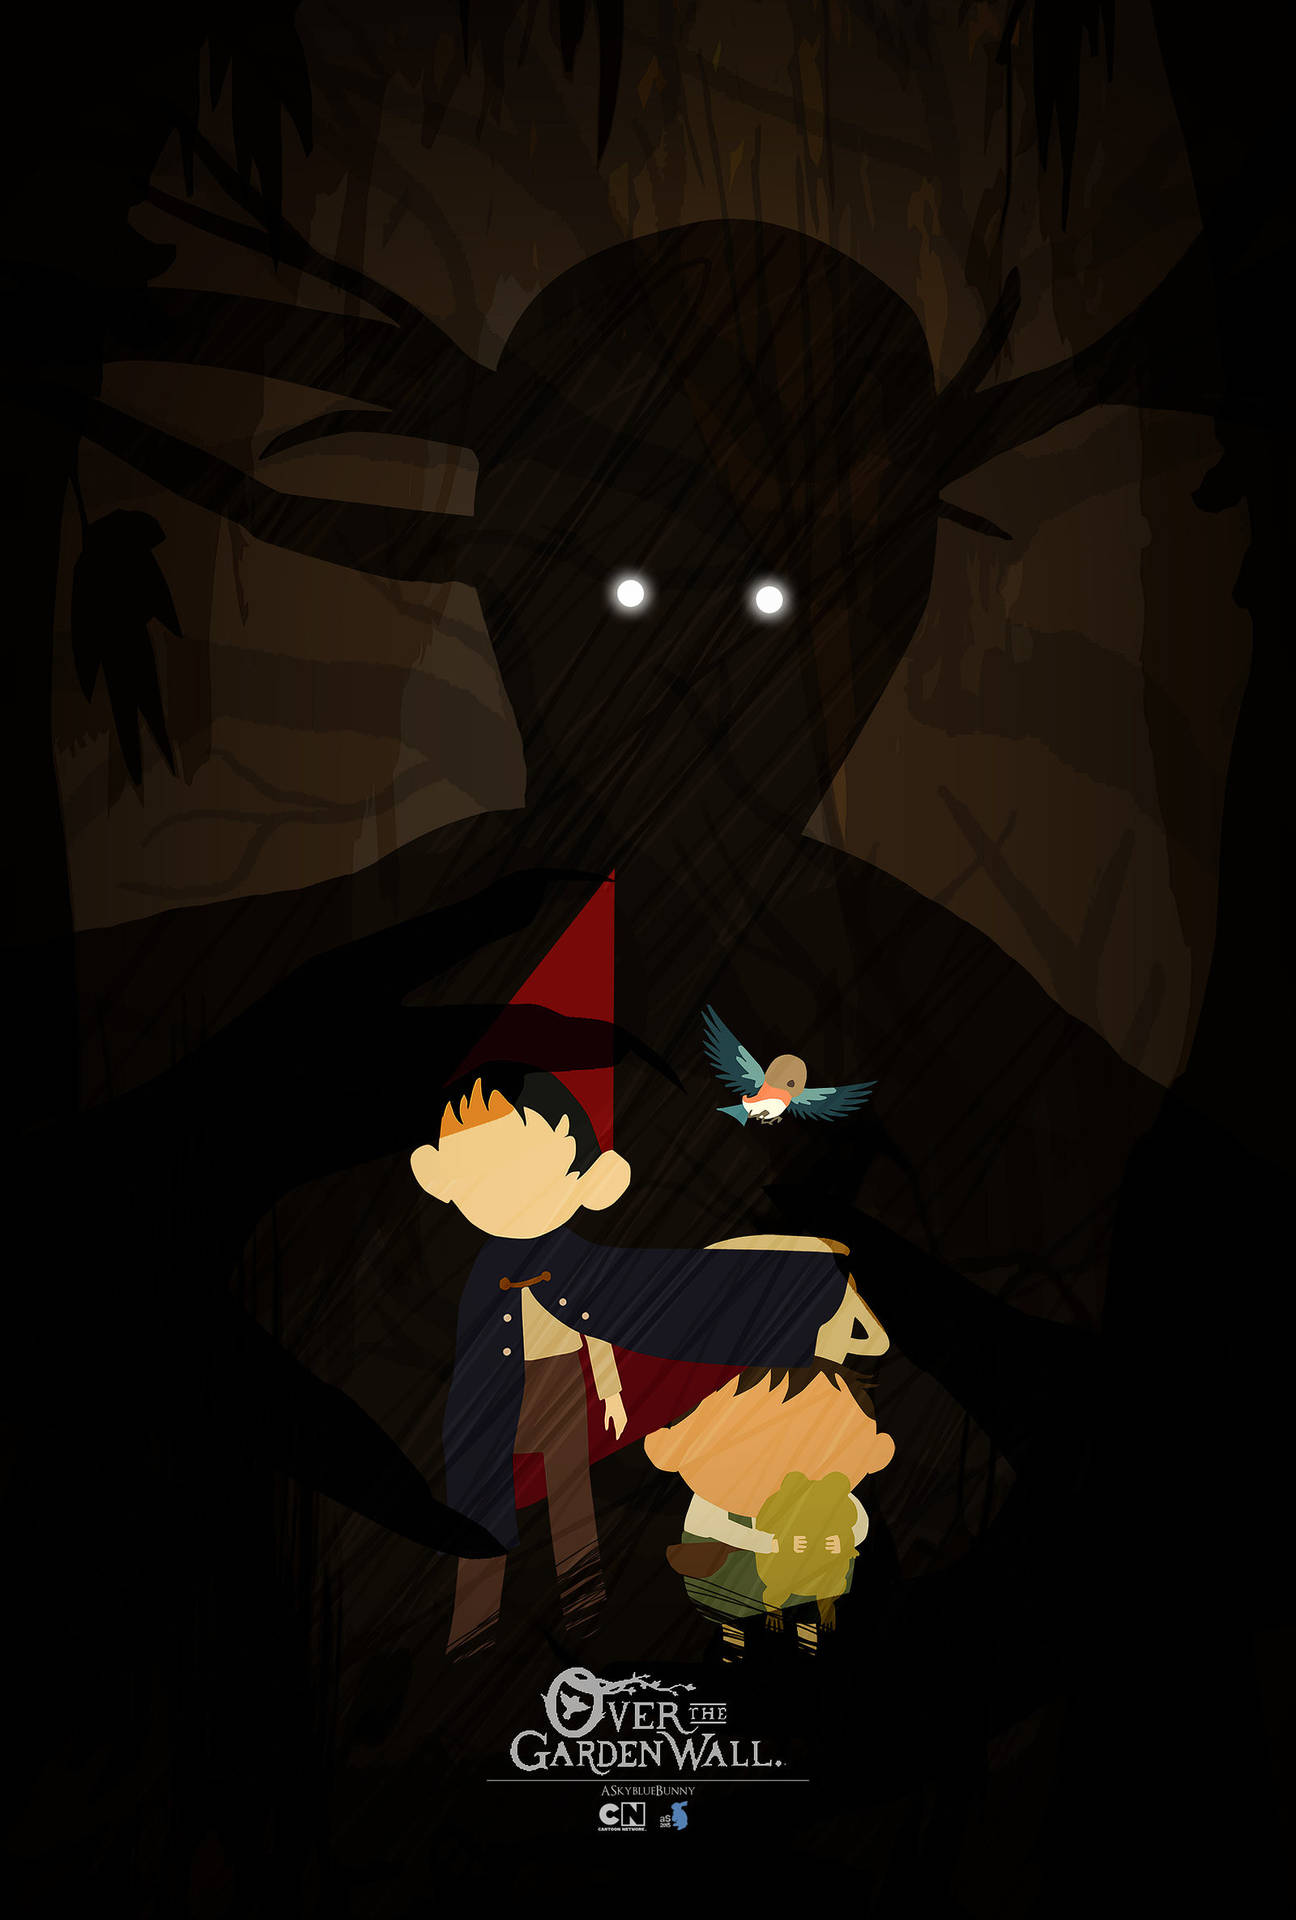 Over The Garden Wall Art Poster Background